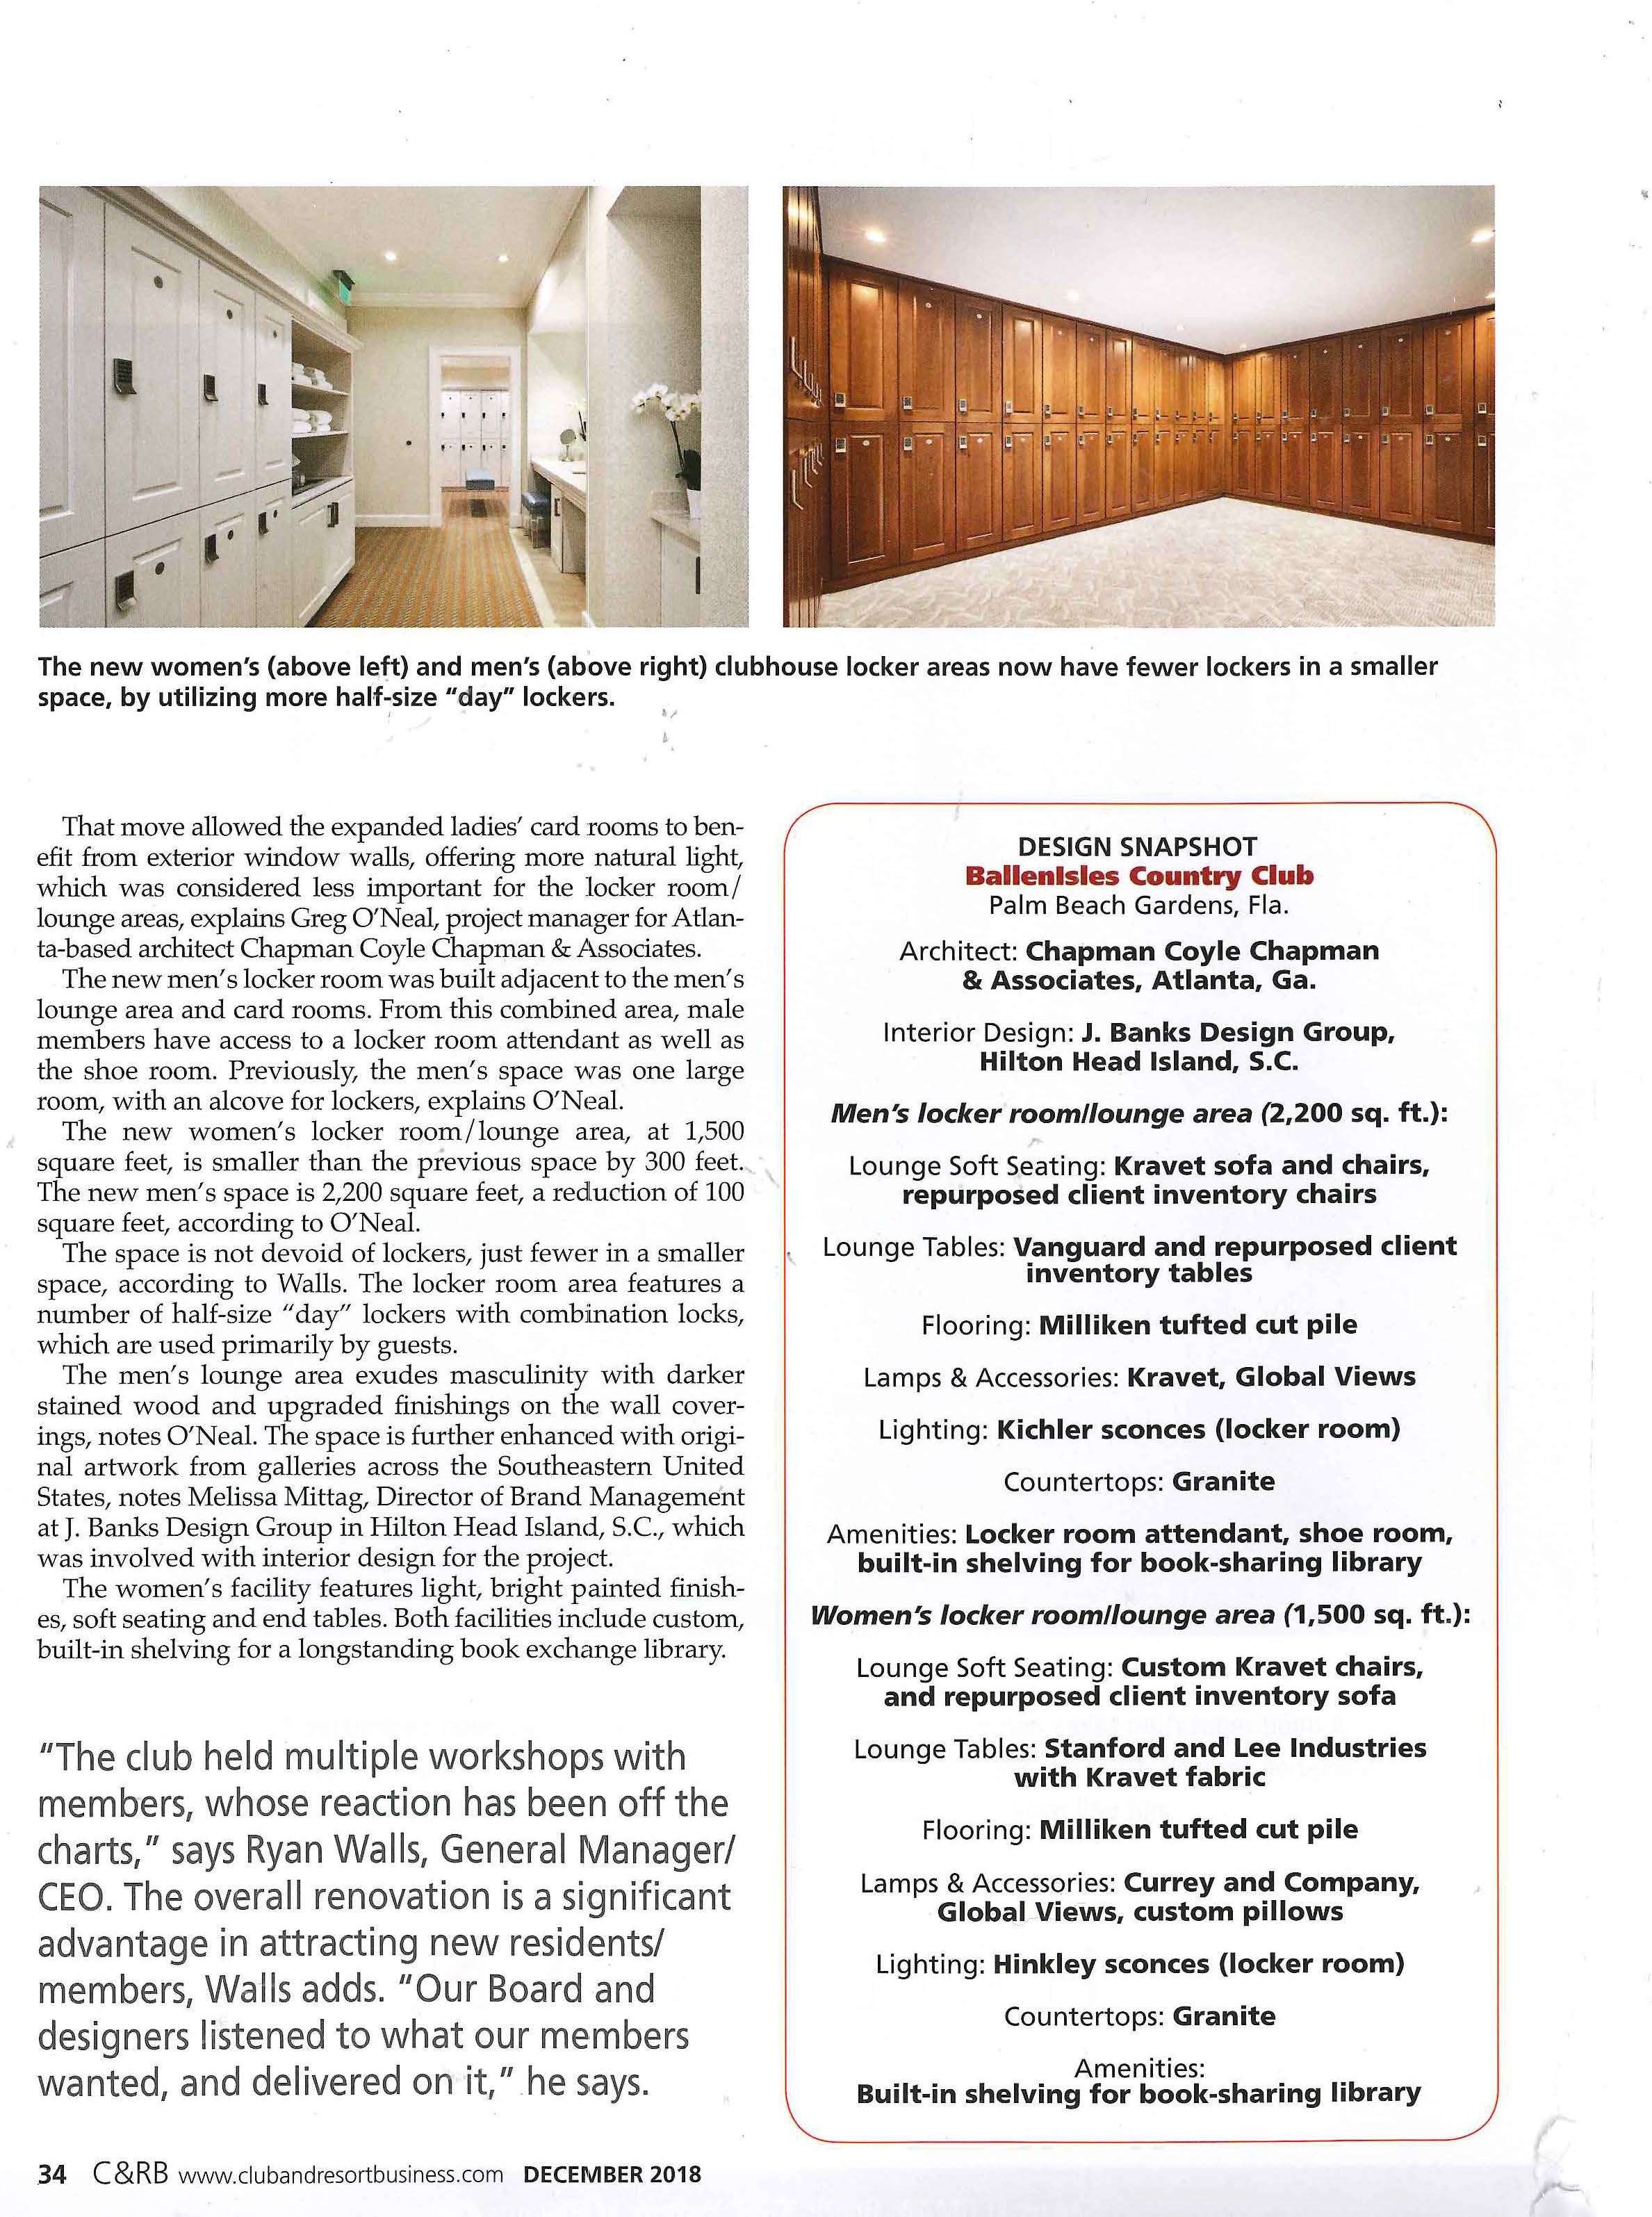 Club & Resort Business features locker rooms of BallenIsles' Clubhouse interior by the J. Banks Design Group